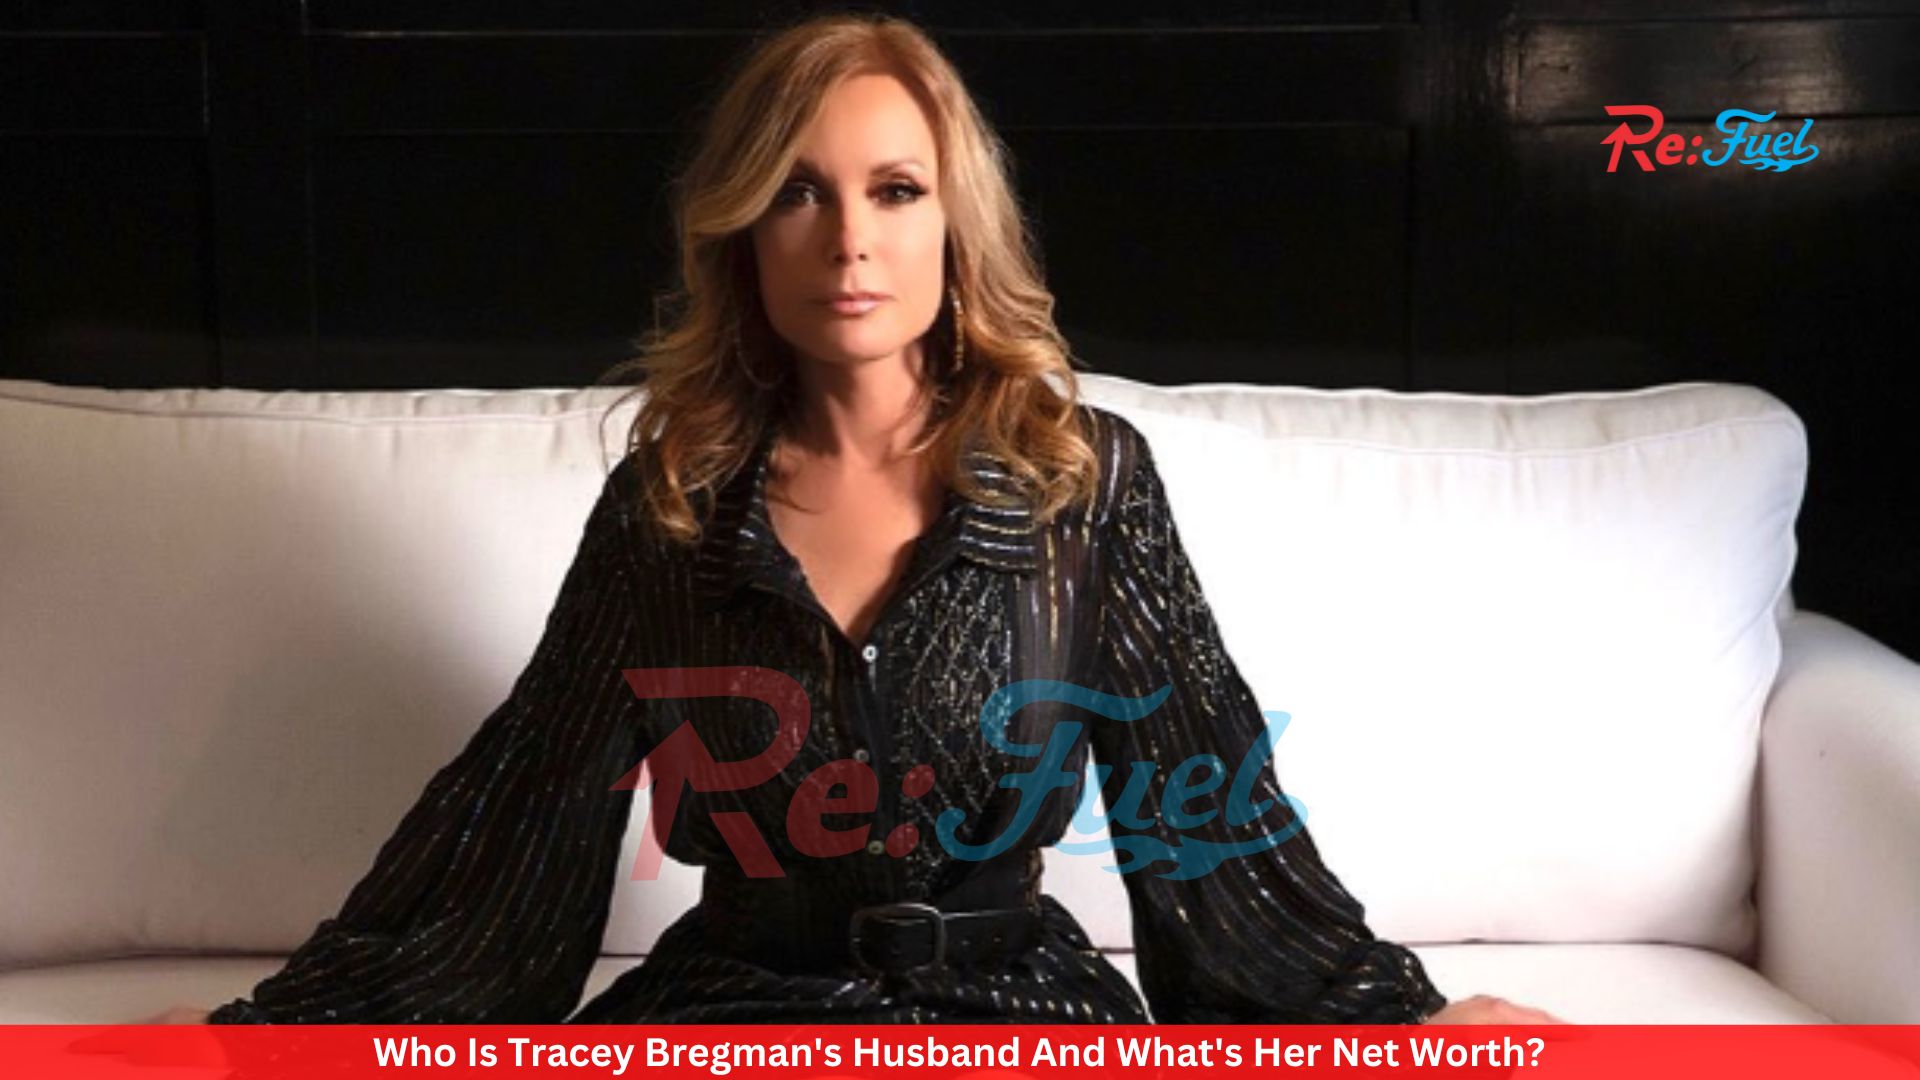 Who Is Tracey Bregman's Husband And What's Her Net Worth?